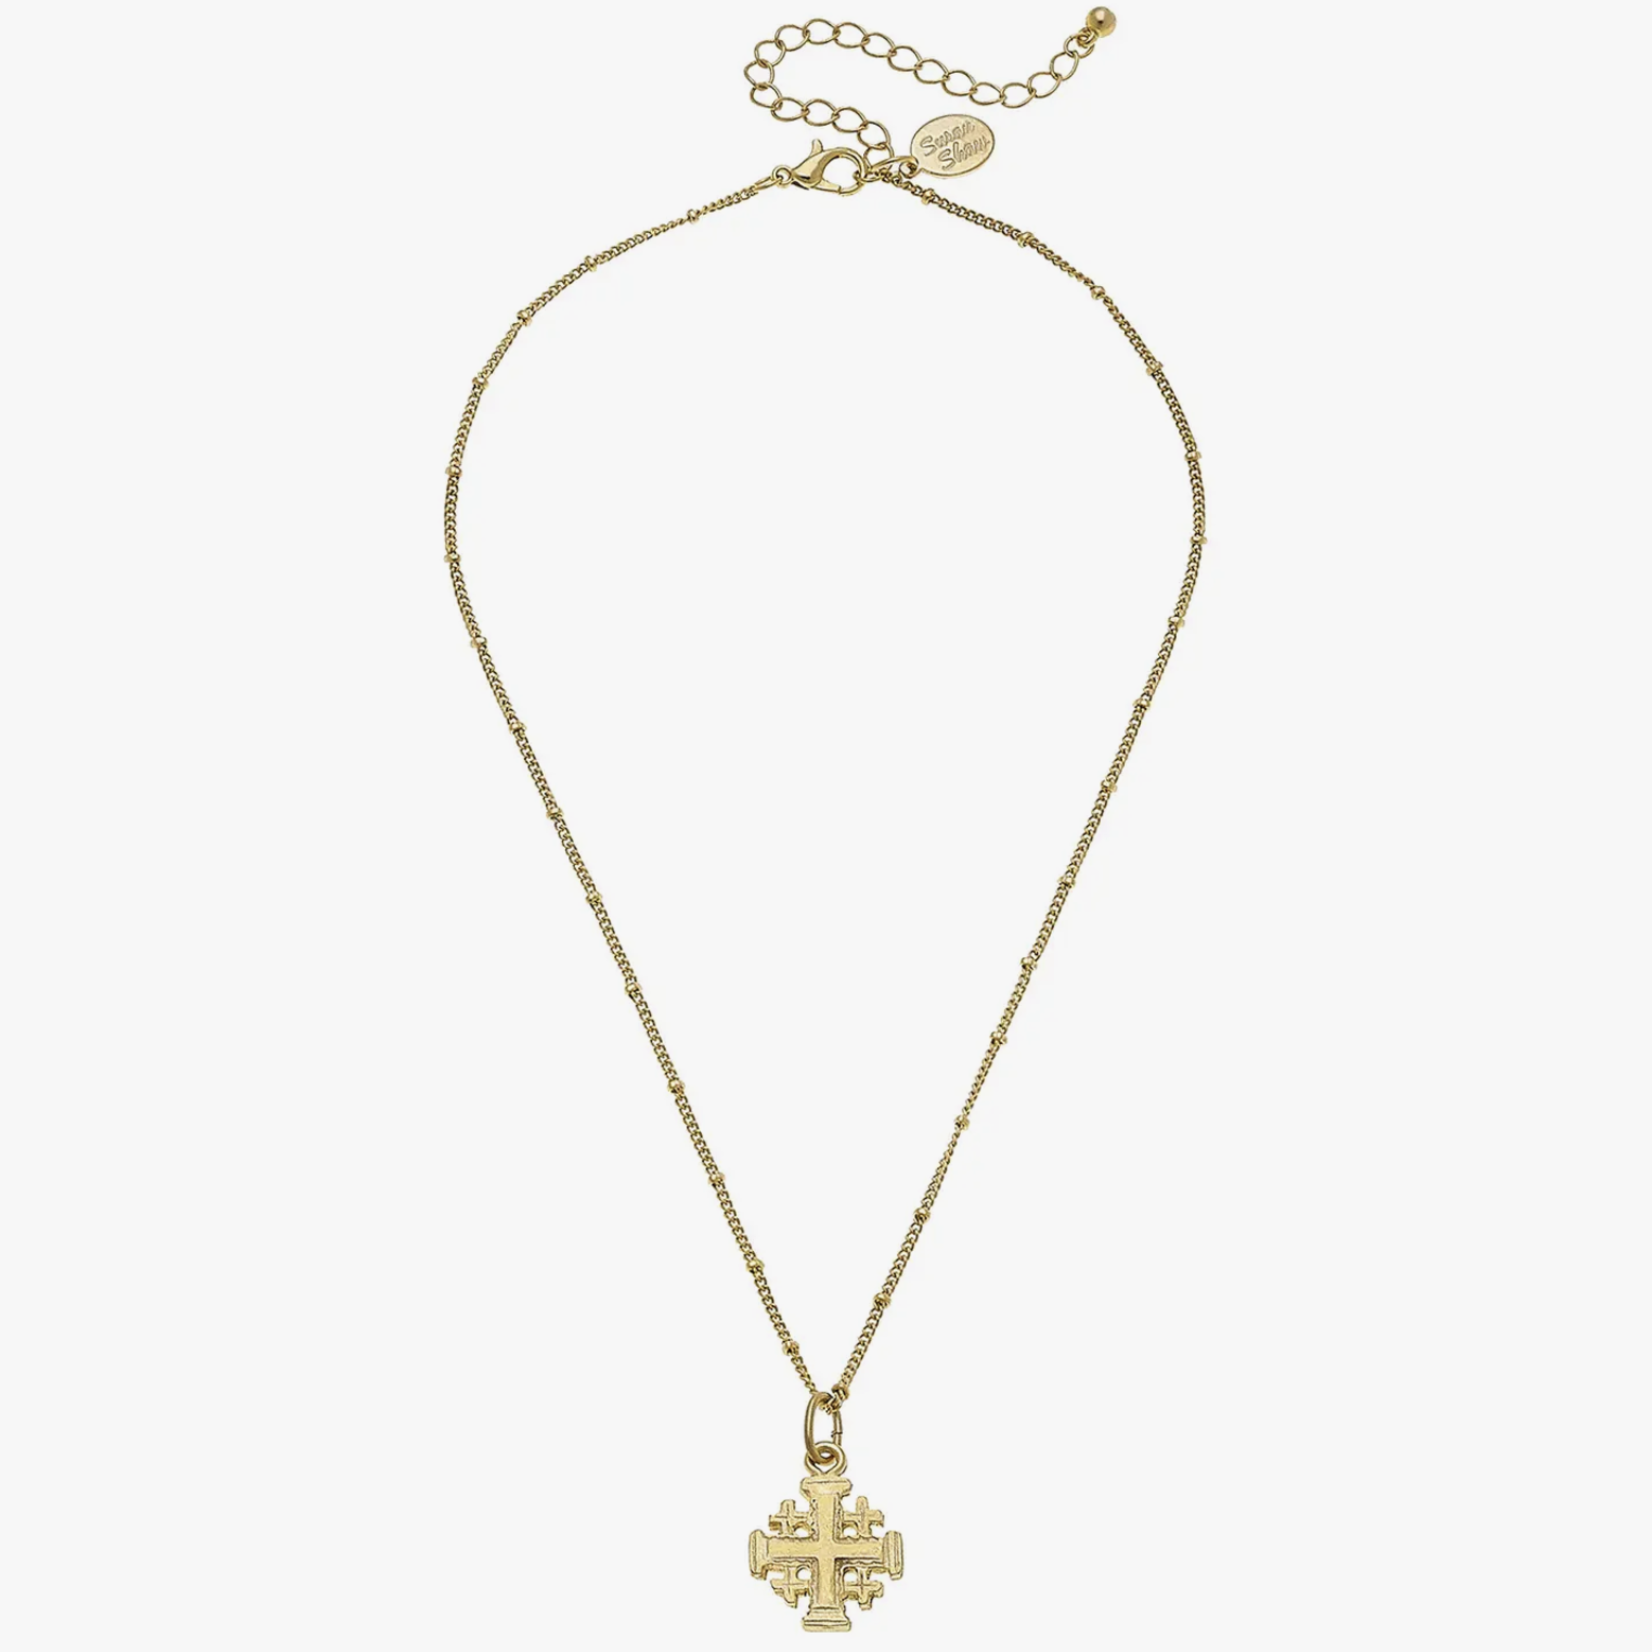 Susan Shaw Gold Multi Cross on Beaded Chain Necklace